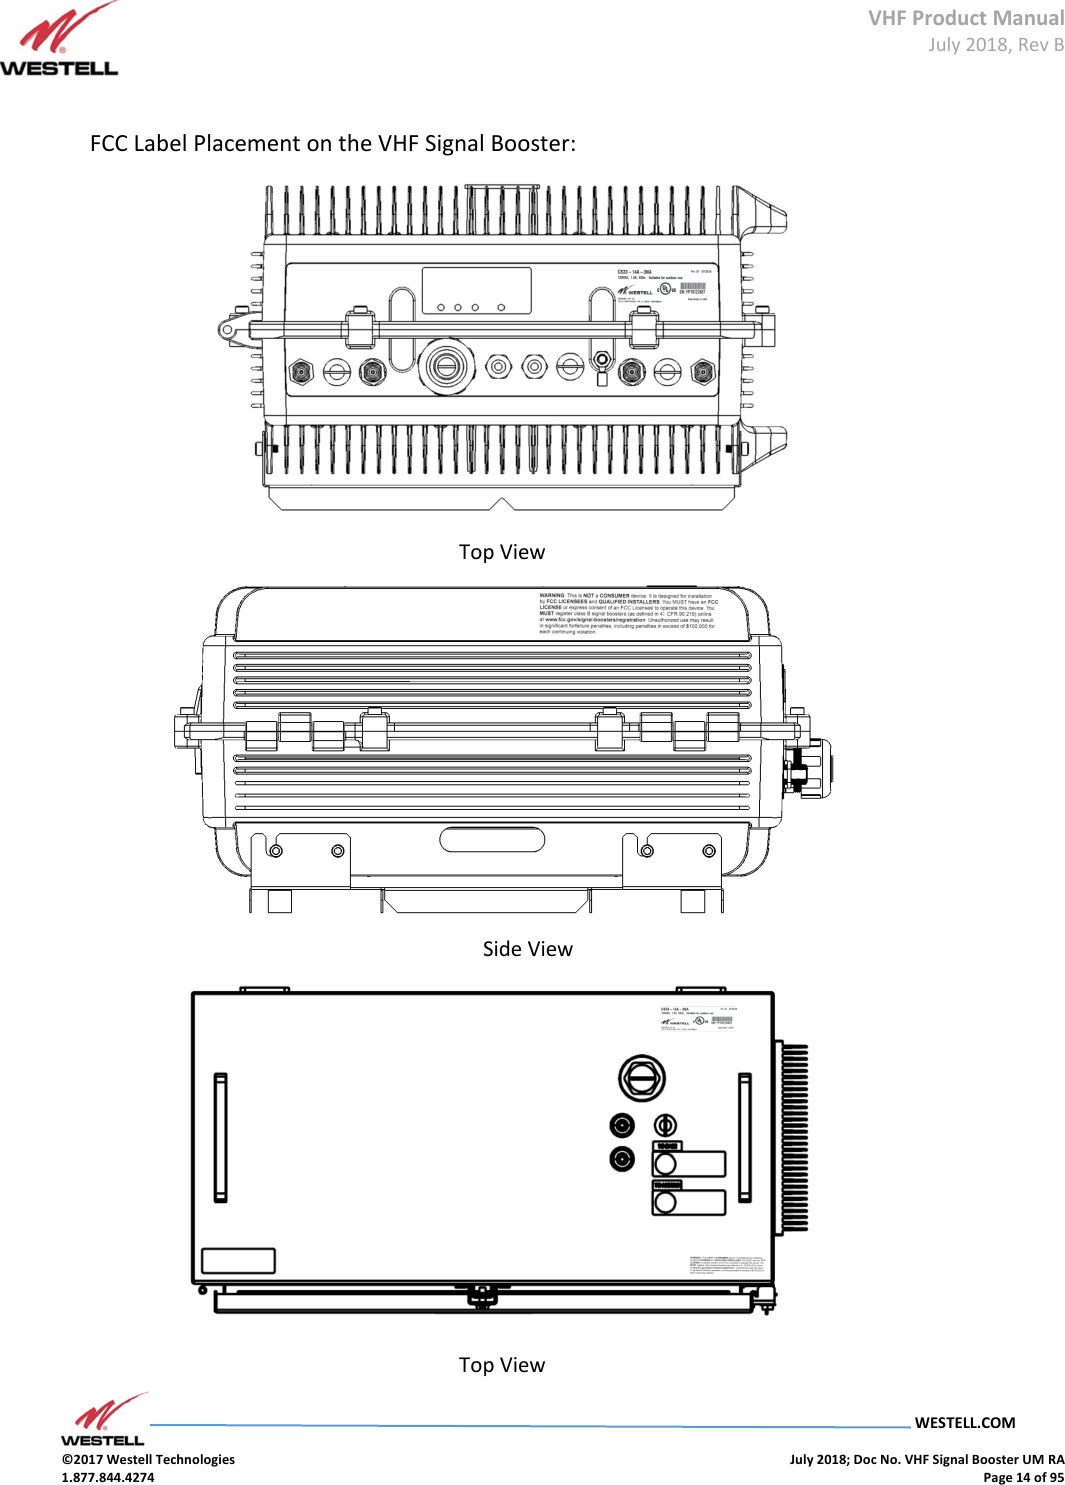 VHF Product Manual July 2018, Rev B   WESTELL.COM  ©2017 Westell Technologies    July 2018; Doc No. VHF Signal Booster UM RA 1.877.844.4274    Page 14 of 95   FCC Label Placement on the VHF Signal Booster:  Top View            Side View  Top View 